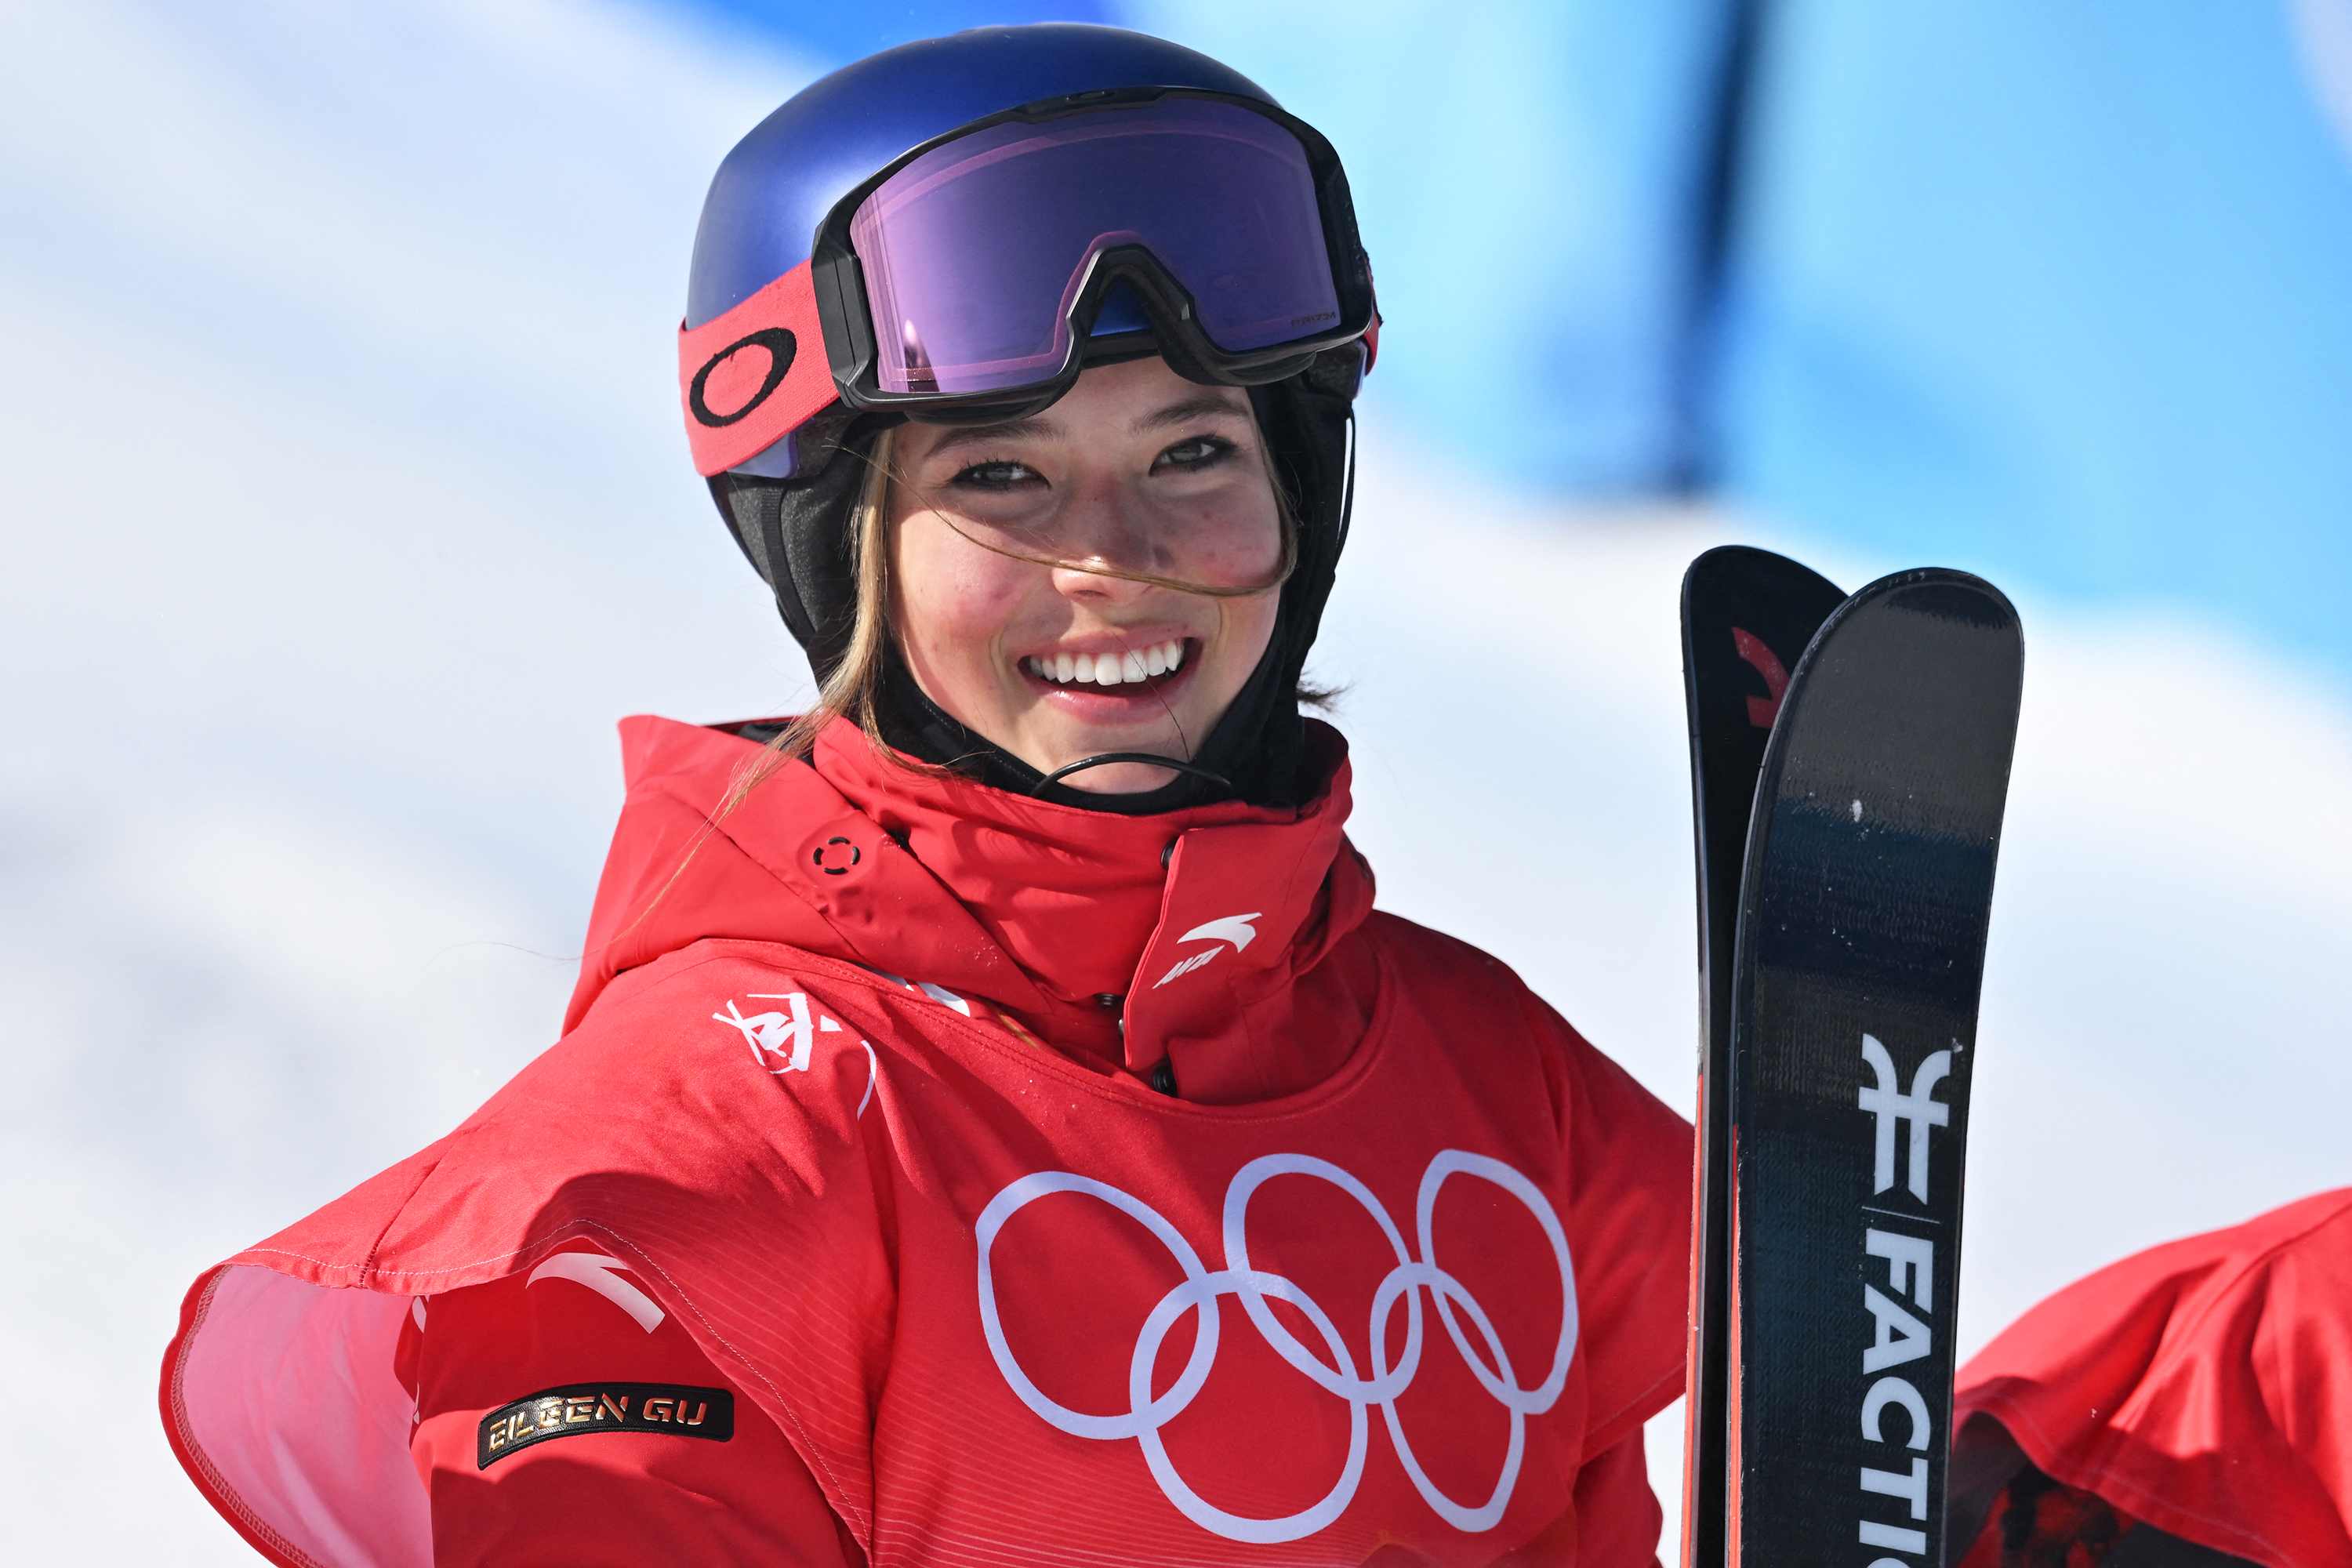 Olympic skier Eileen Gu defends China's internet restrictions